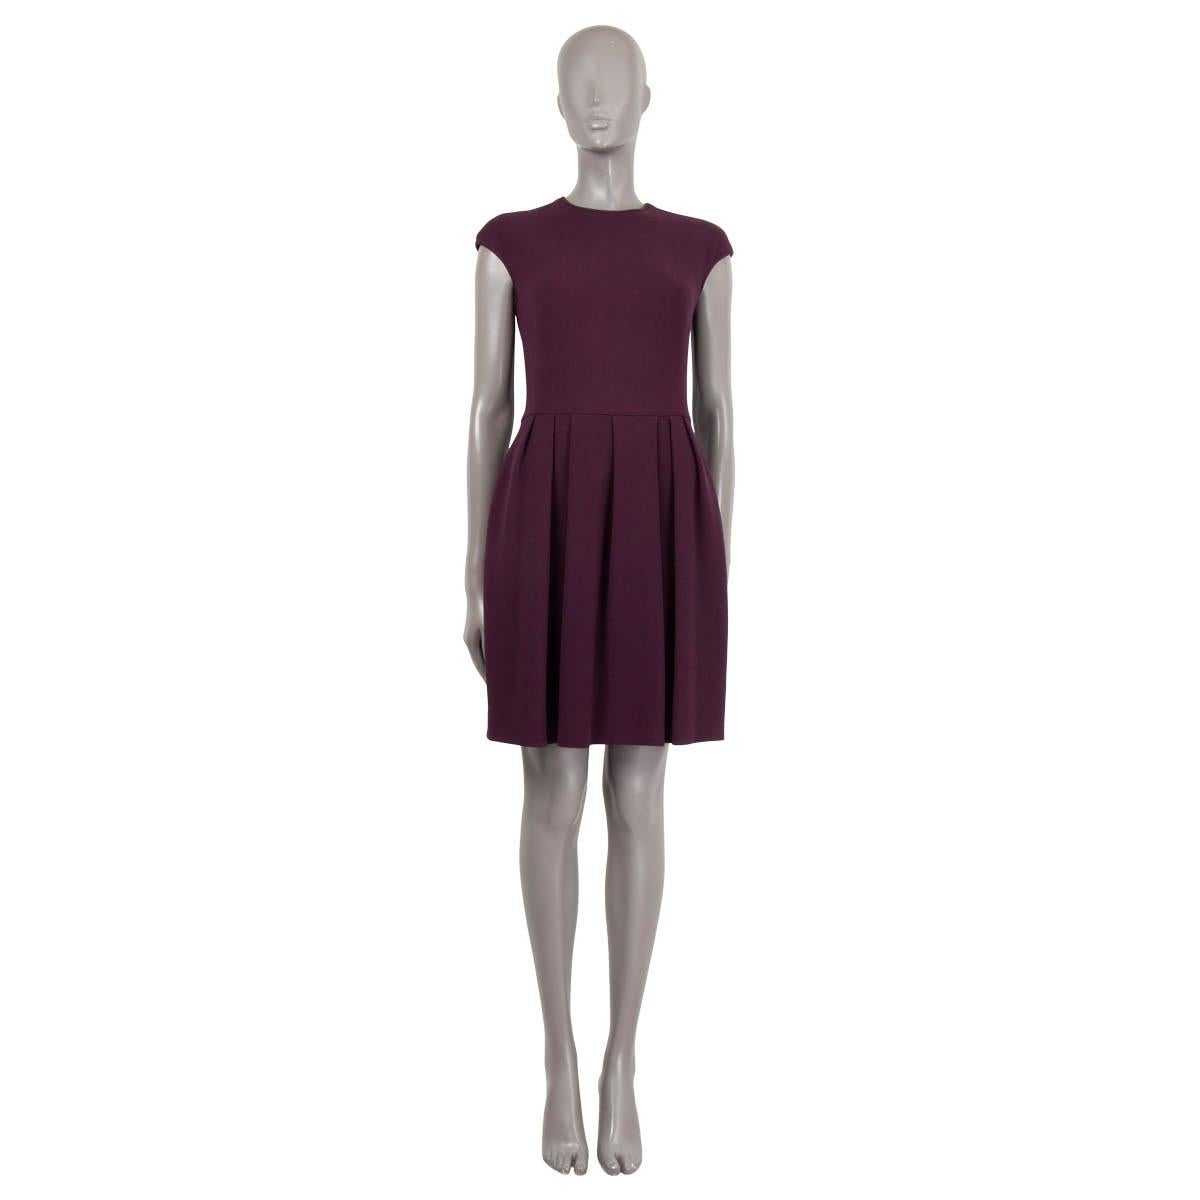 100% authentic Christian Dior dress in eggplant wool (93%), polyamide (30%) and elastane (2%). Features short sleeves and pleats on the skirt. Lined in silk (93%) and lycra (7%). Has been worn and is in excellent condition.

Measurements
Tag